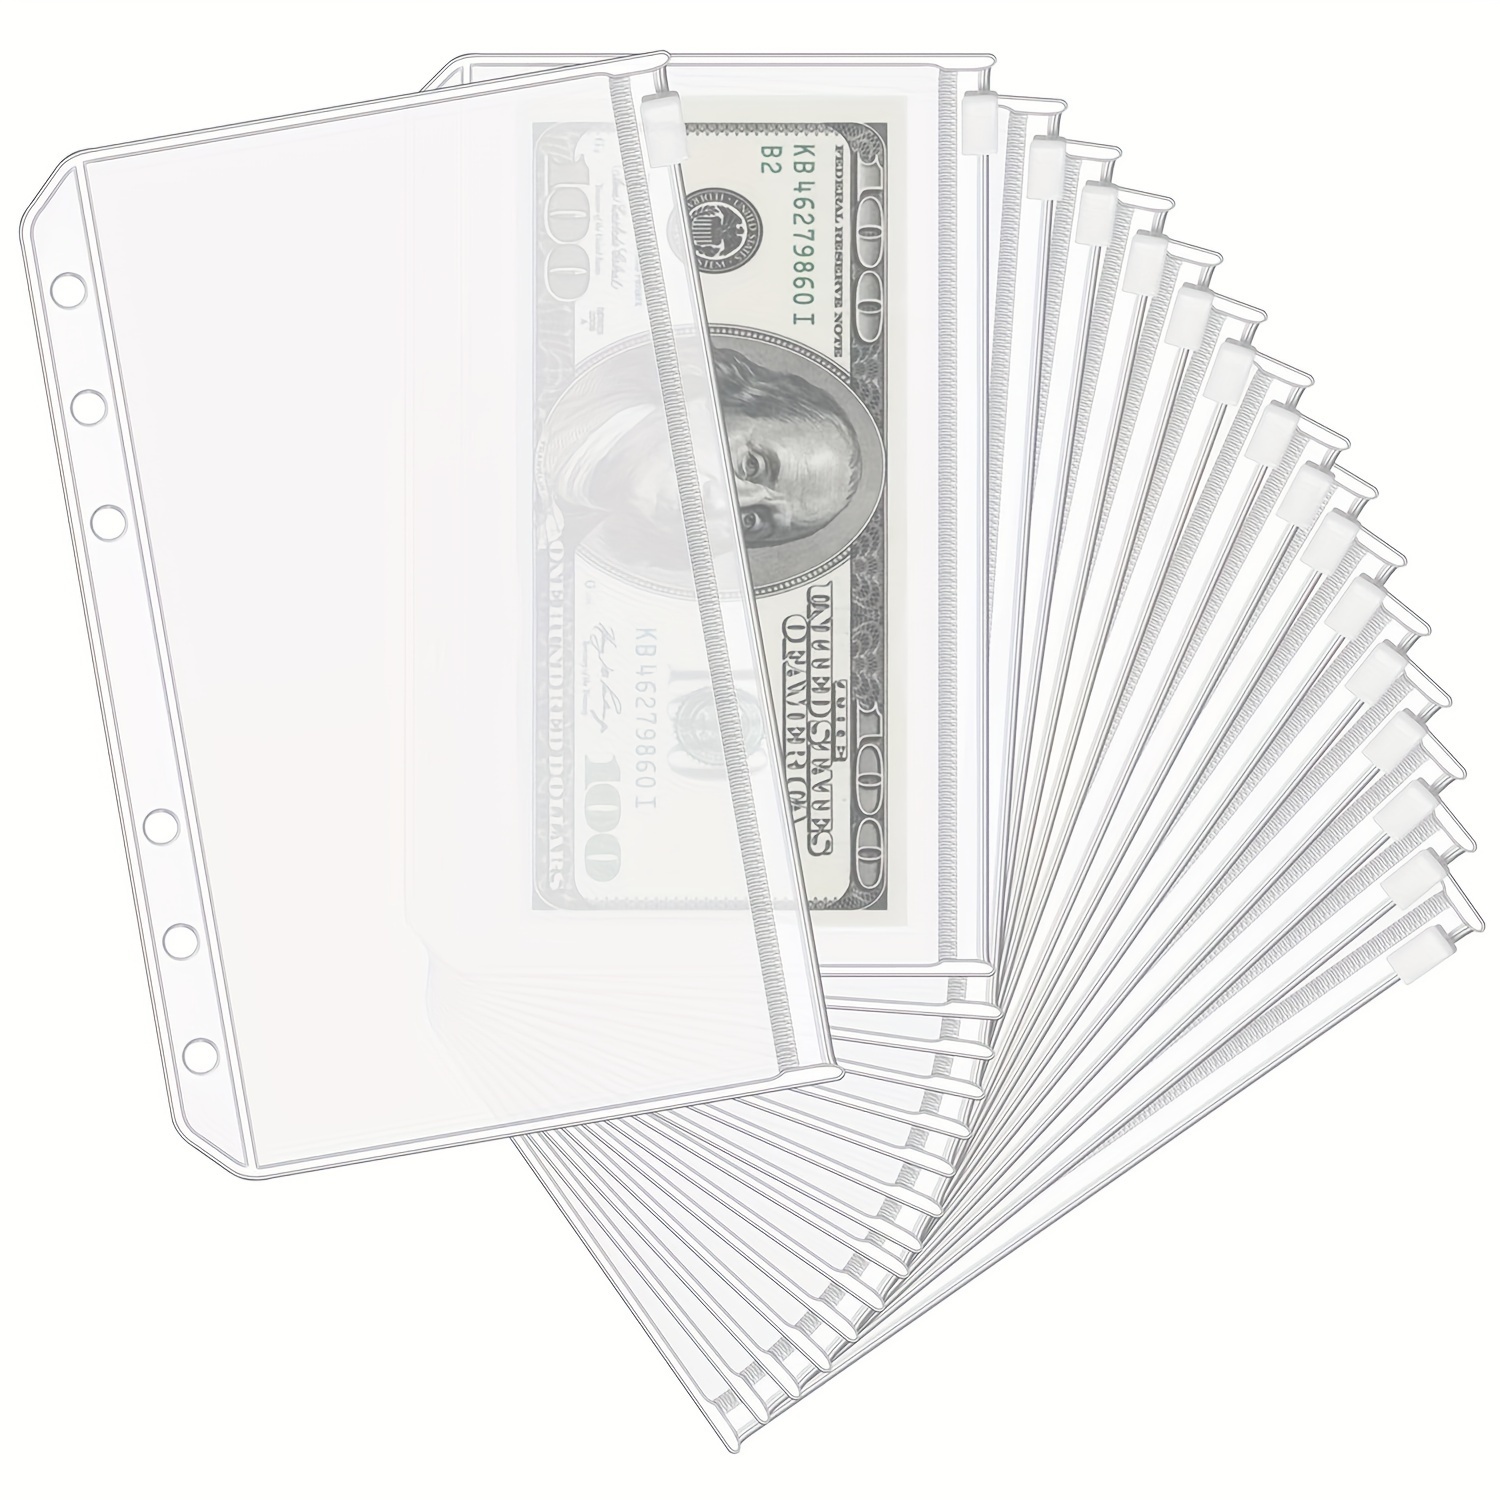 

16pcs A6 Binder Pockets 6 Hole Cash Envelopes For Budgeting, Clear Zipper Folders For 6 Ring Budget Binder, Money Envelope Binder Pockets Waterproof Pvc Document Pencil Pouch Organizer